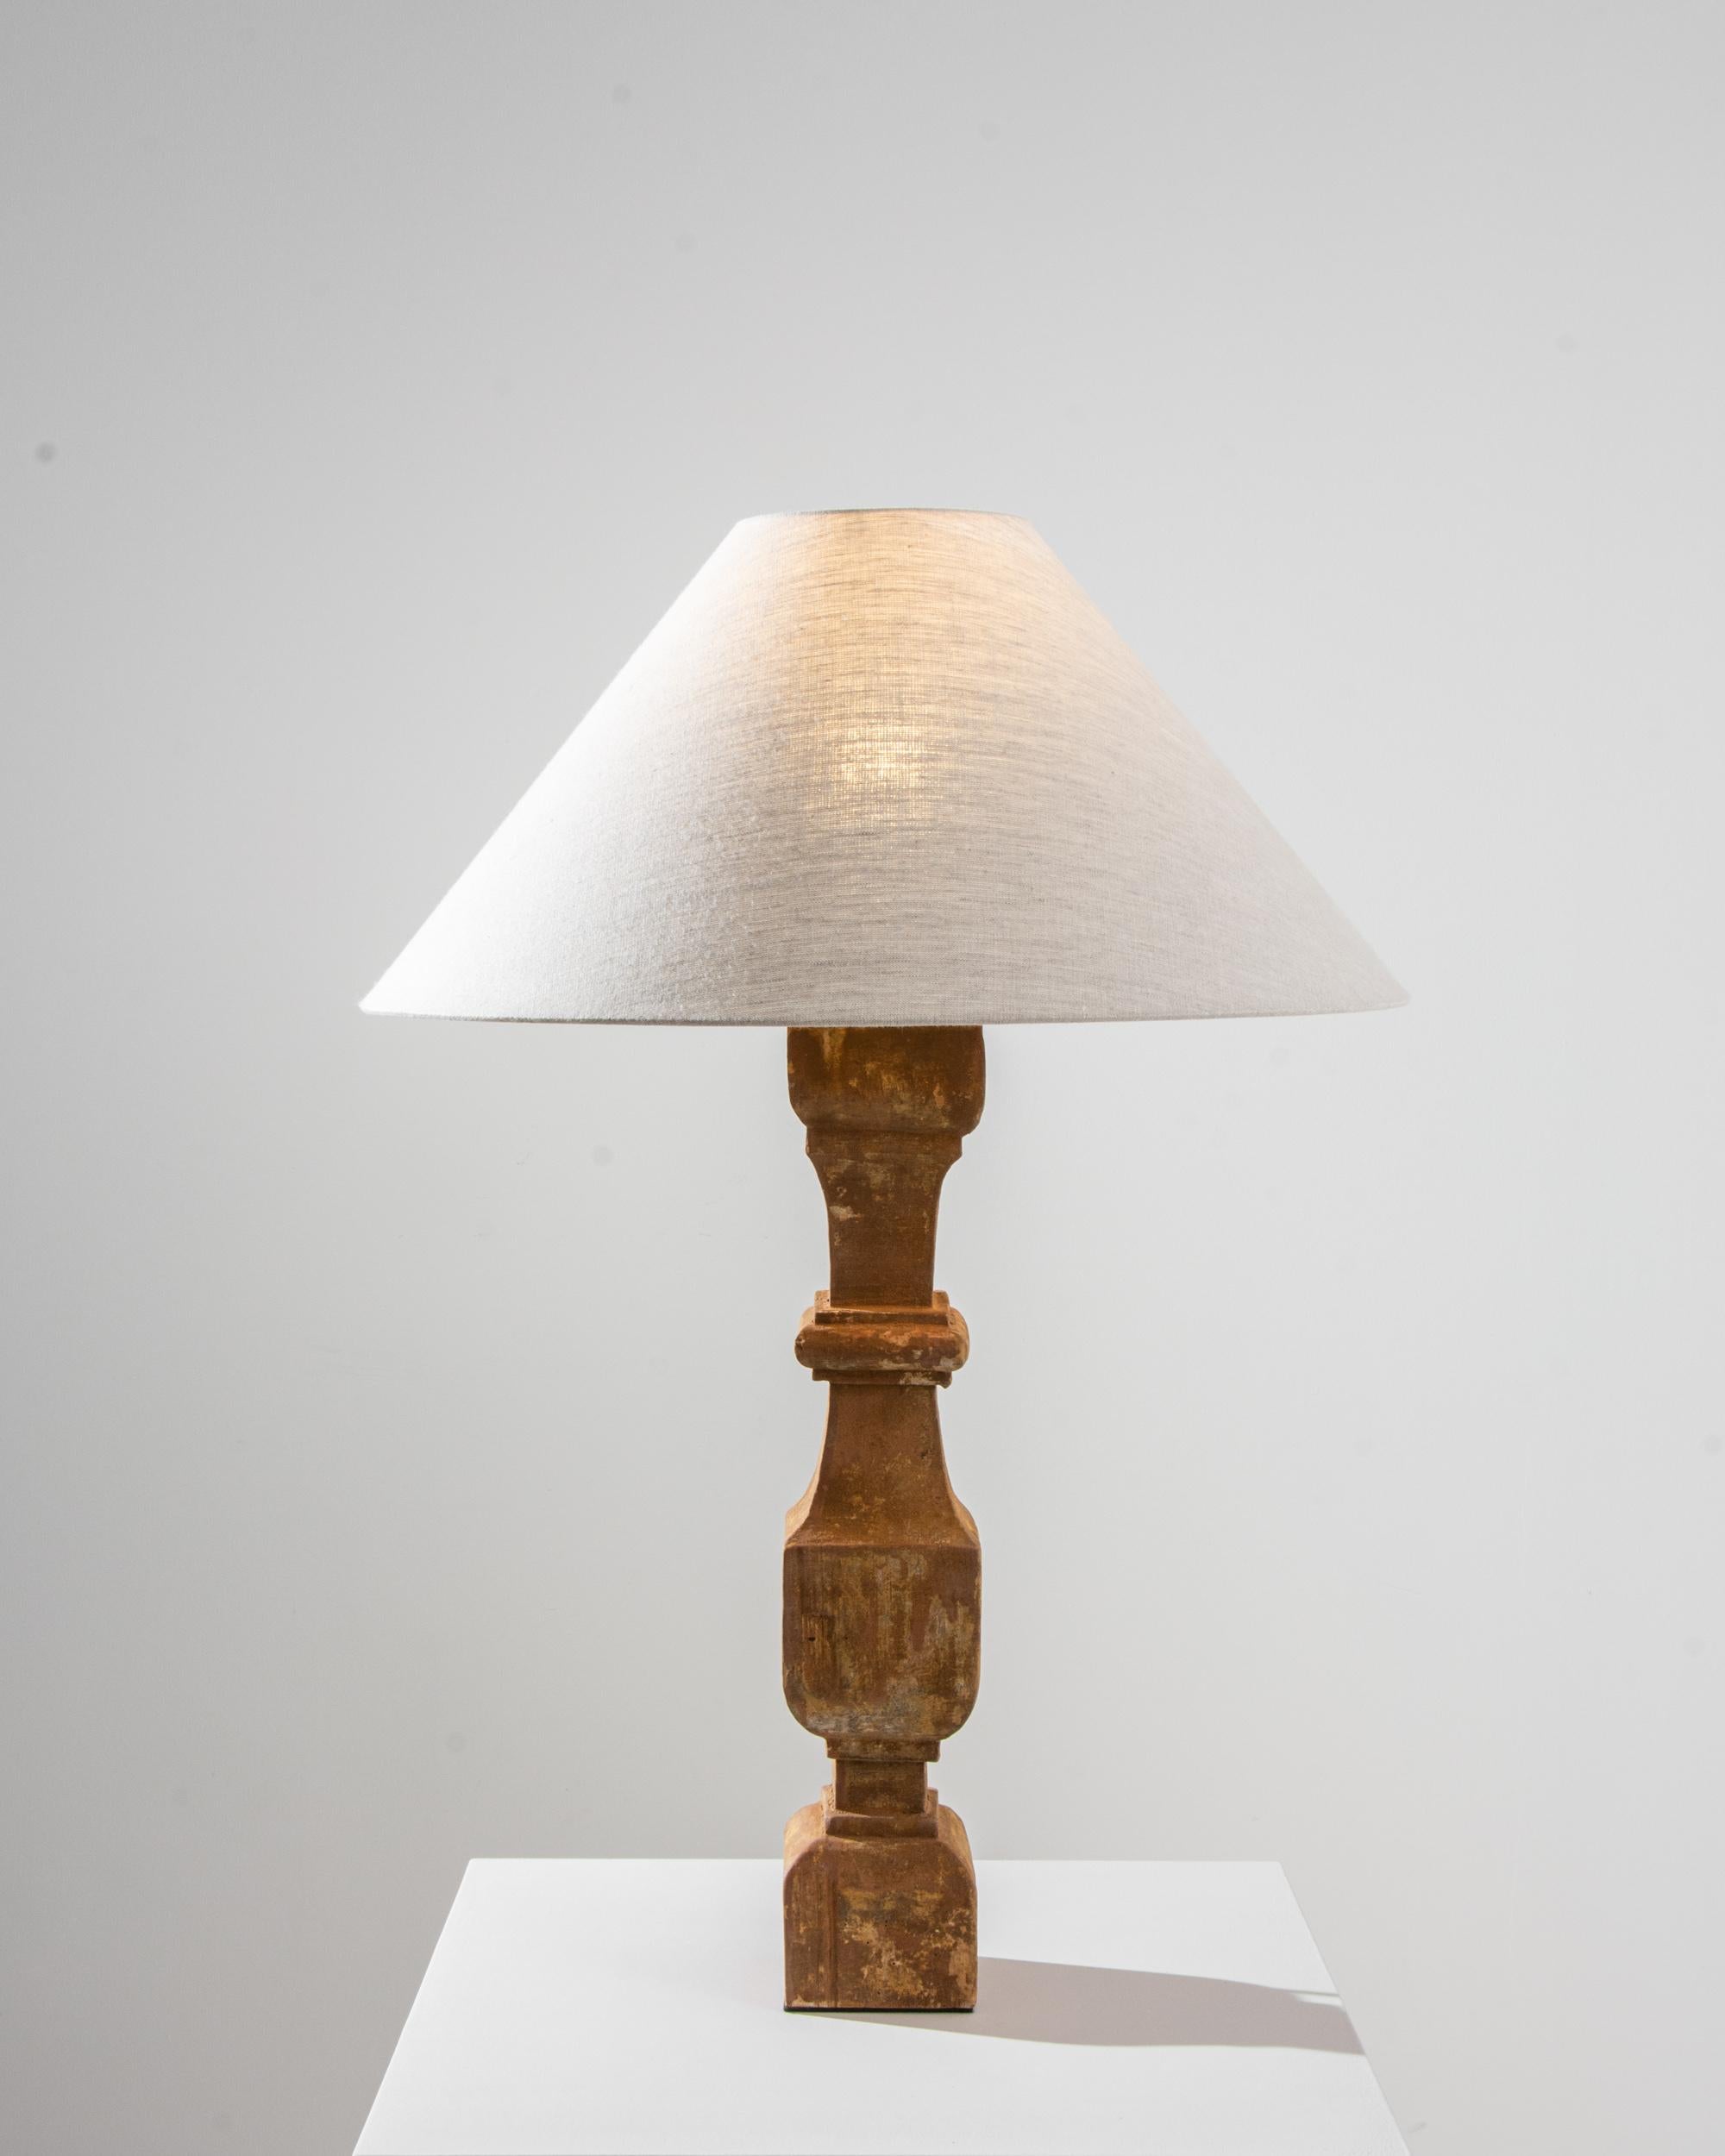 The harmonious simplicity and warm patina of this wooden table lamp make a delightful antique accent. The base is made from a repurposed Provincial table leg, built in France in the 1800s. Bead-and cove details and stretcher blocks bring a pleasing